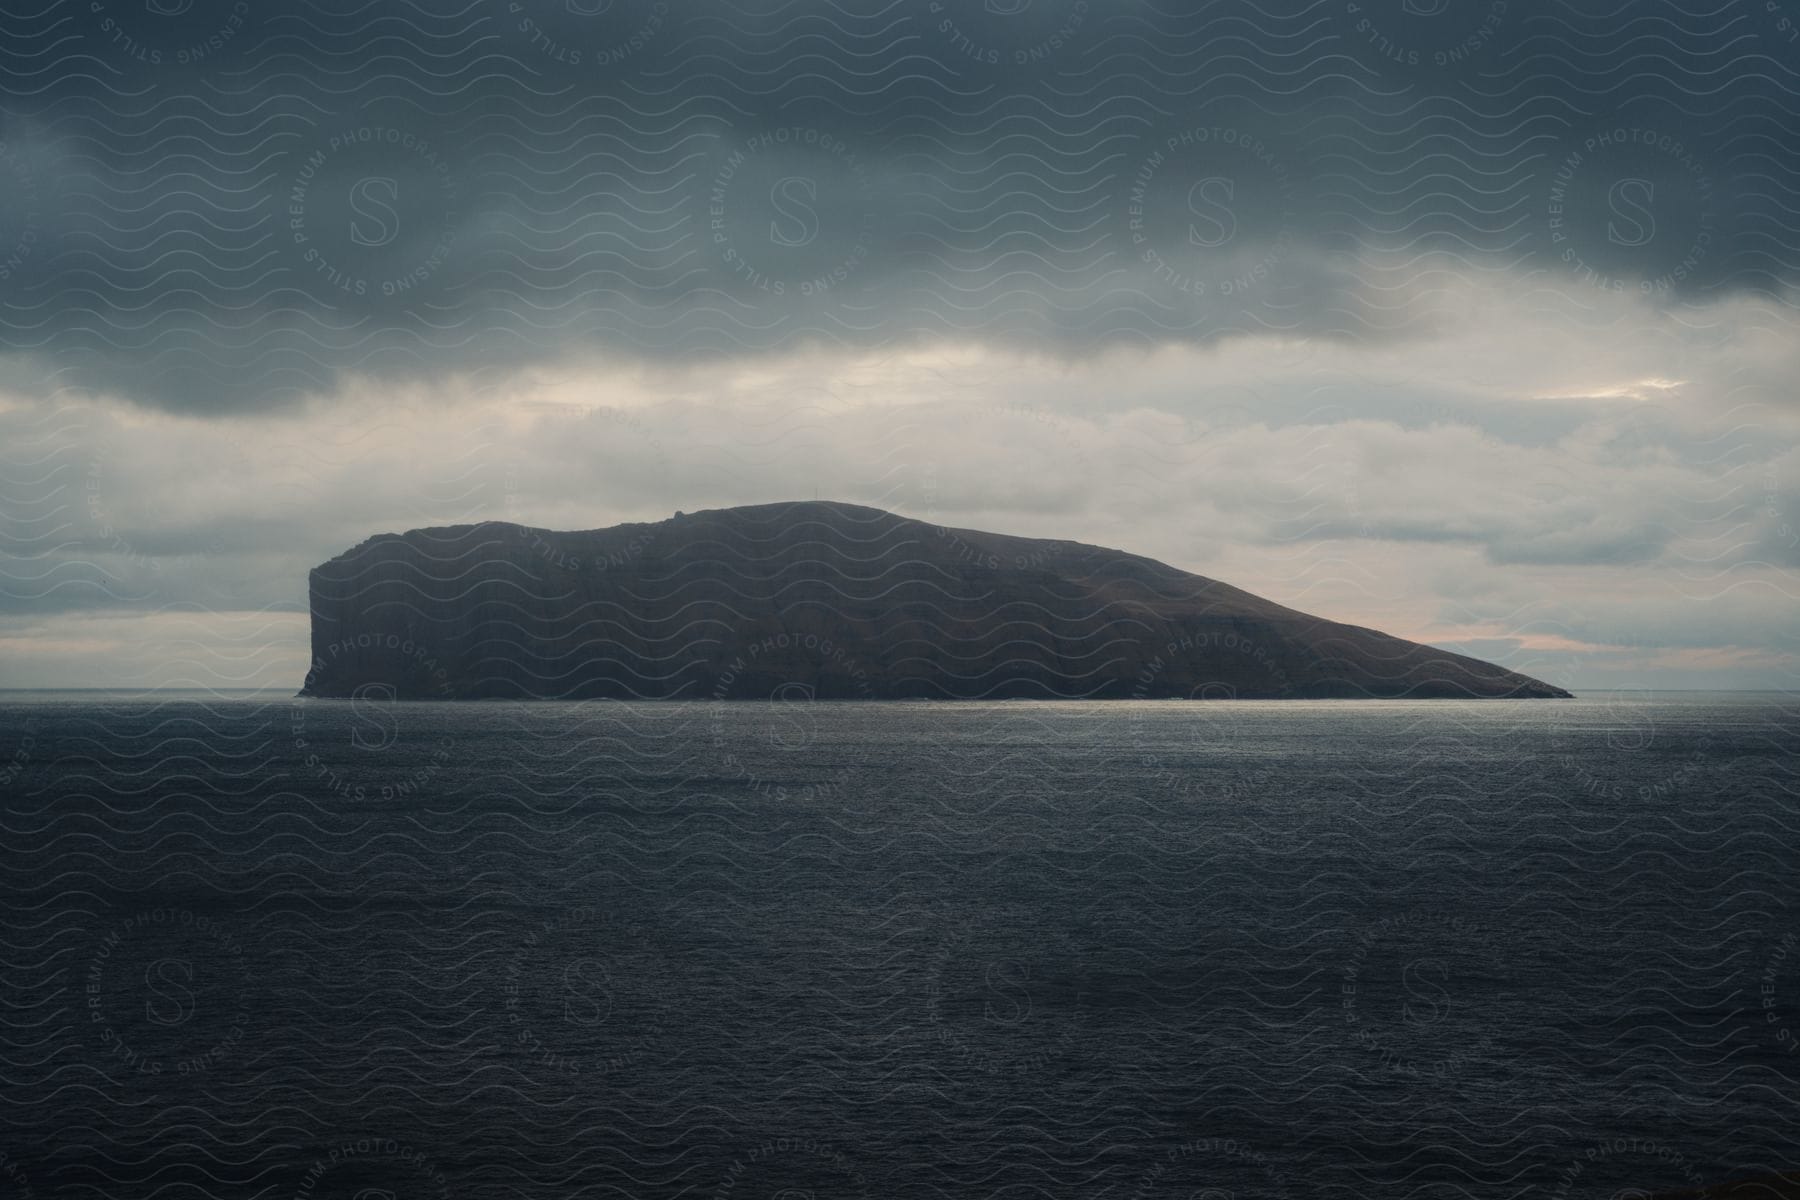 An island with steep cliffs surrounded by calm water and stormy clouds